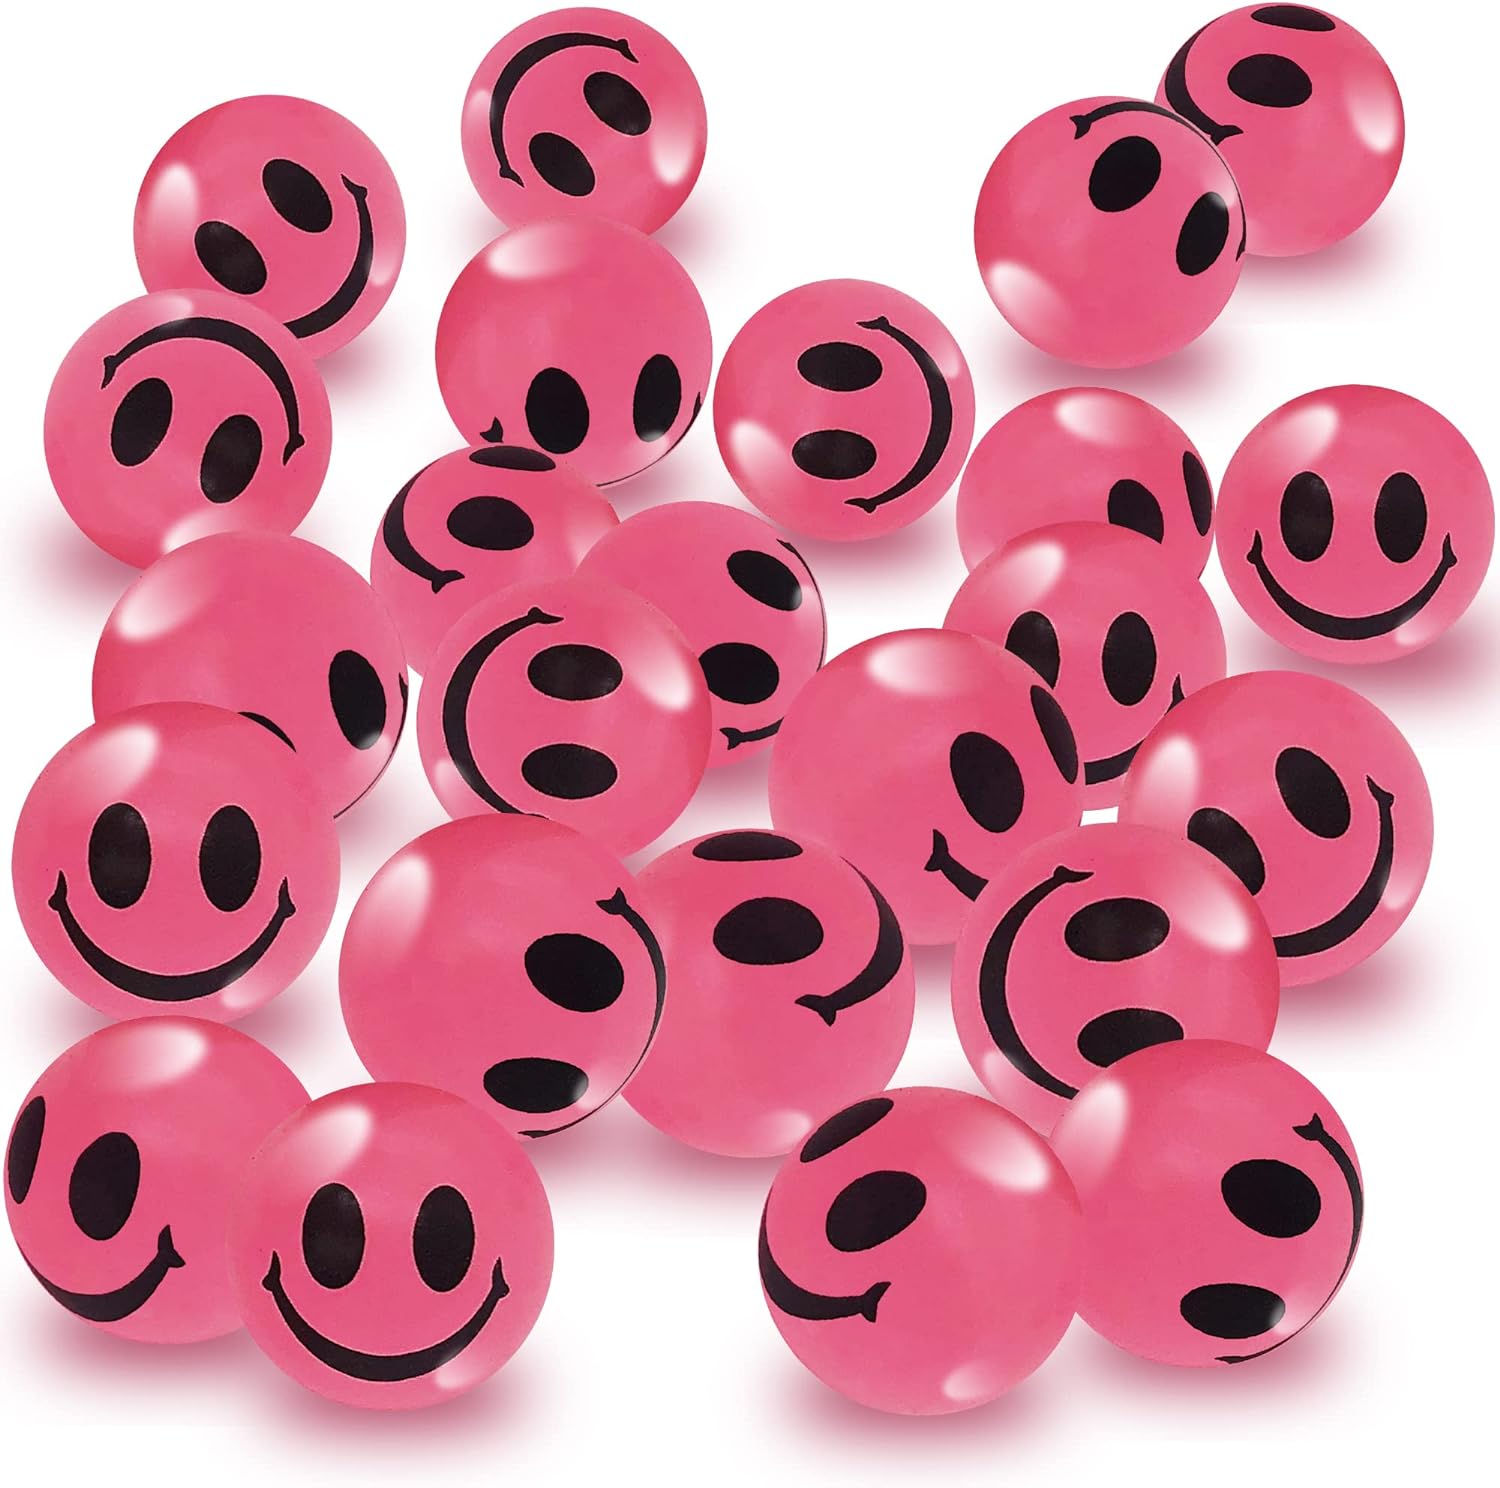 ArtCreativity Pink Glow in The Dark Smile Face Bouncing Balls - Bulk Pack of 36-1 Inch High-Bounce Bouncy Balls for Kids, Glowing Party Favors and Goodie Bag Fillers for Boys and Girls